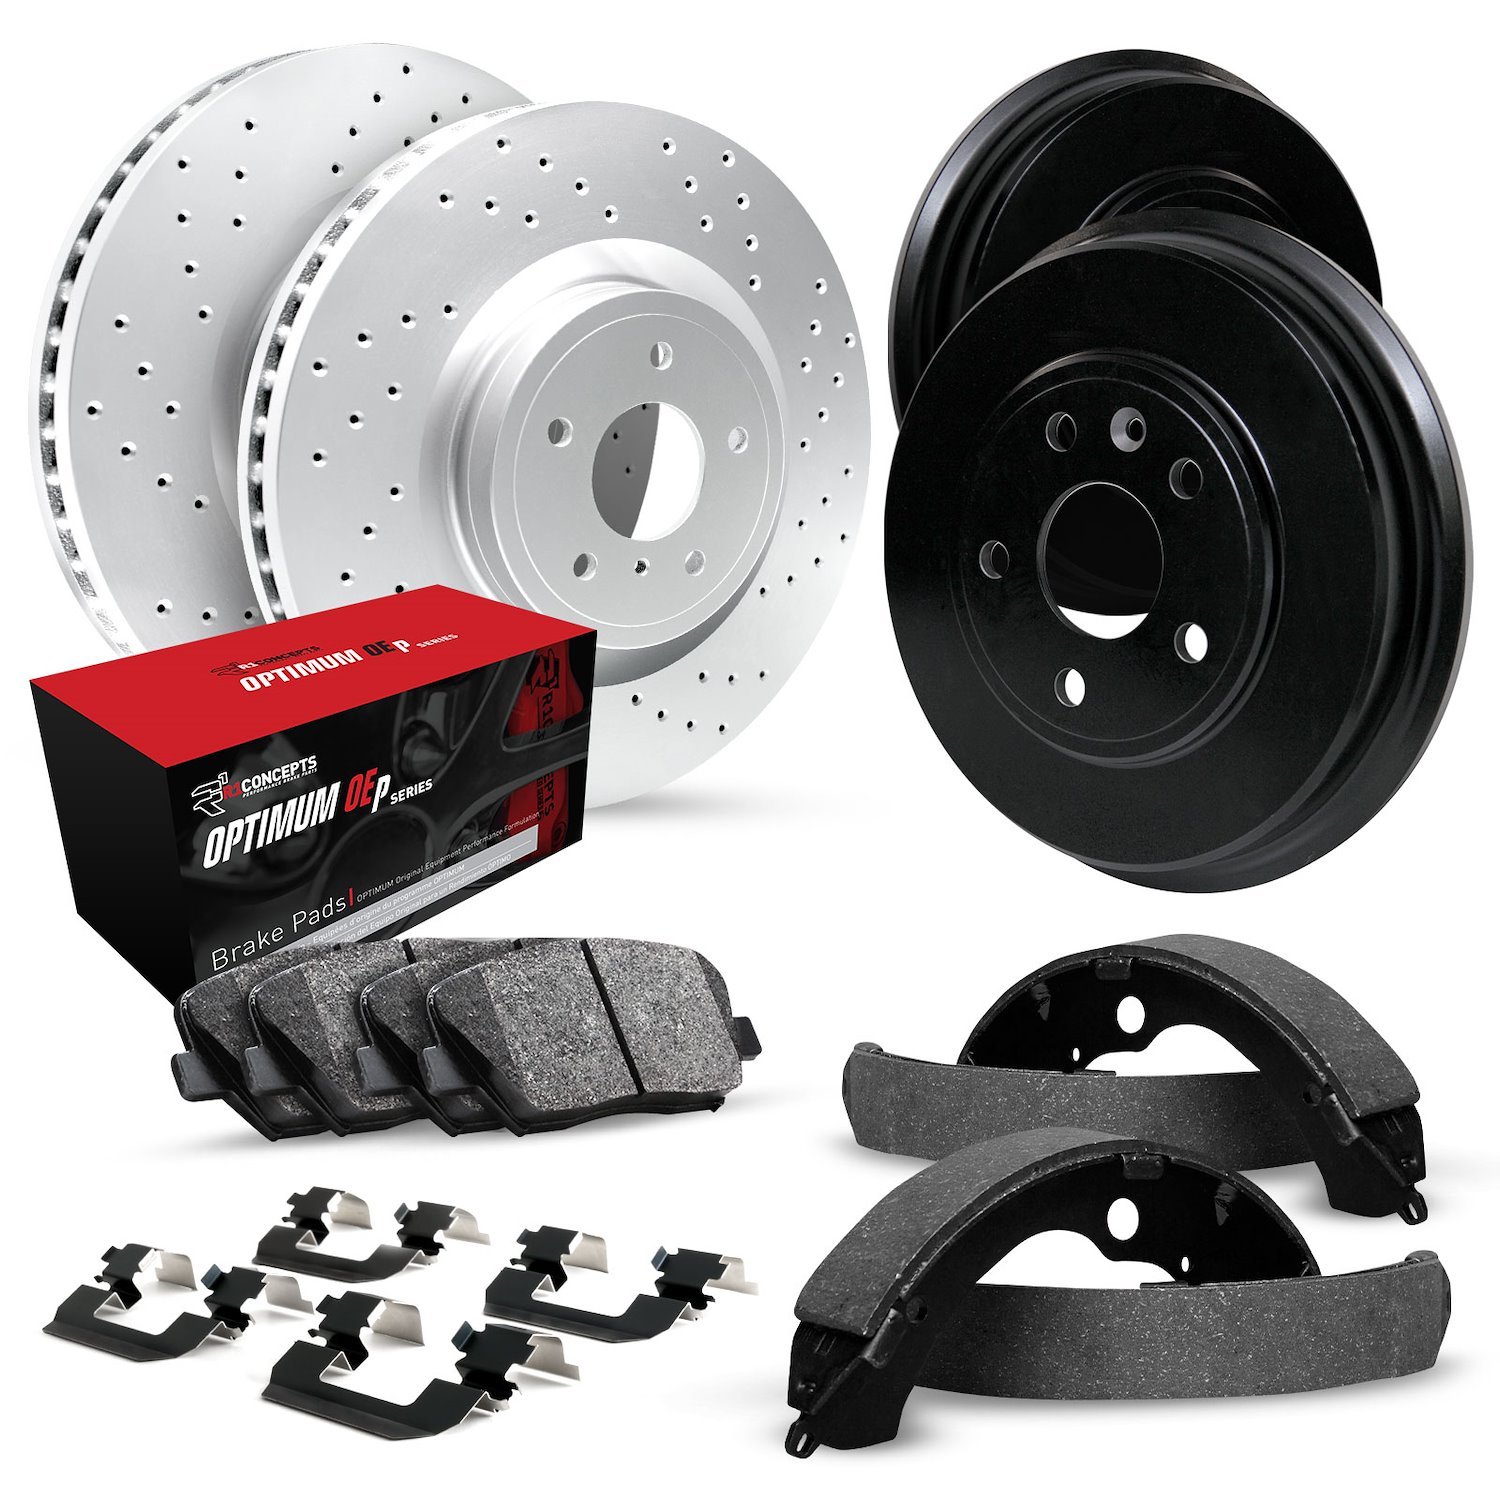 GEO-Carbon Drilled Brake Rotor & Drum Set w/Optimum OE Pads, Shoes, & Hardware, 1999-2001 Acura/Honda, Position: Front & Rear